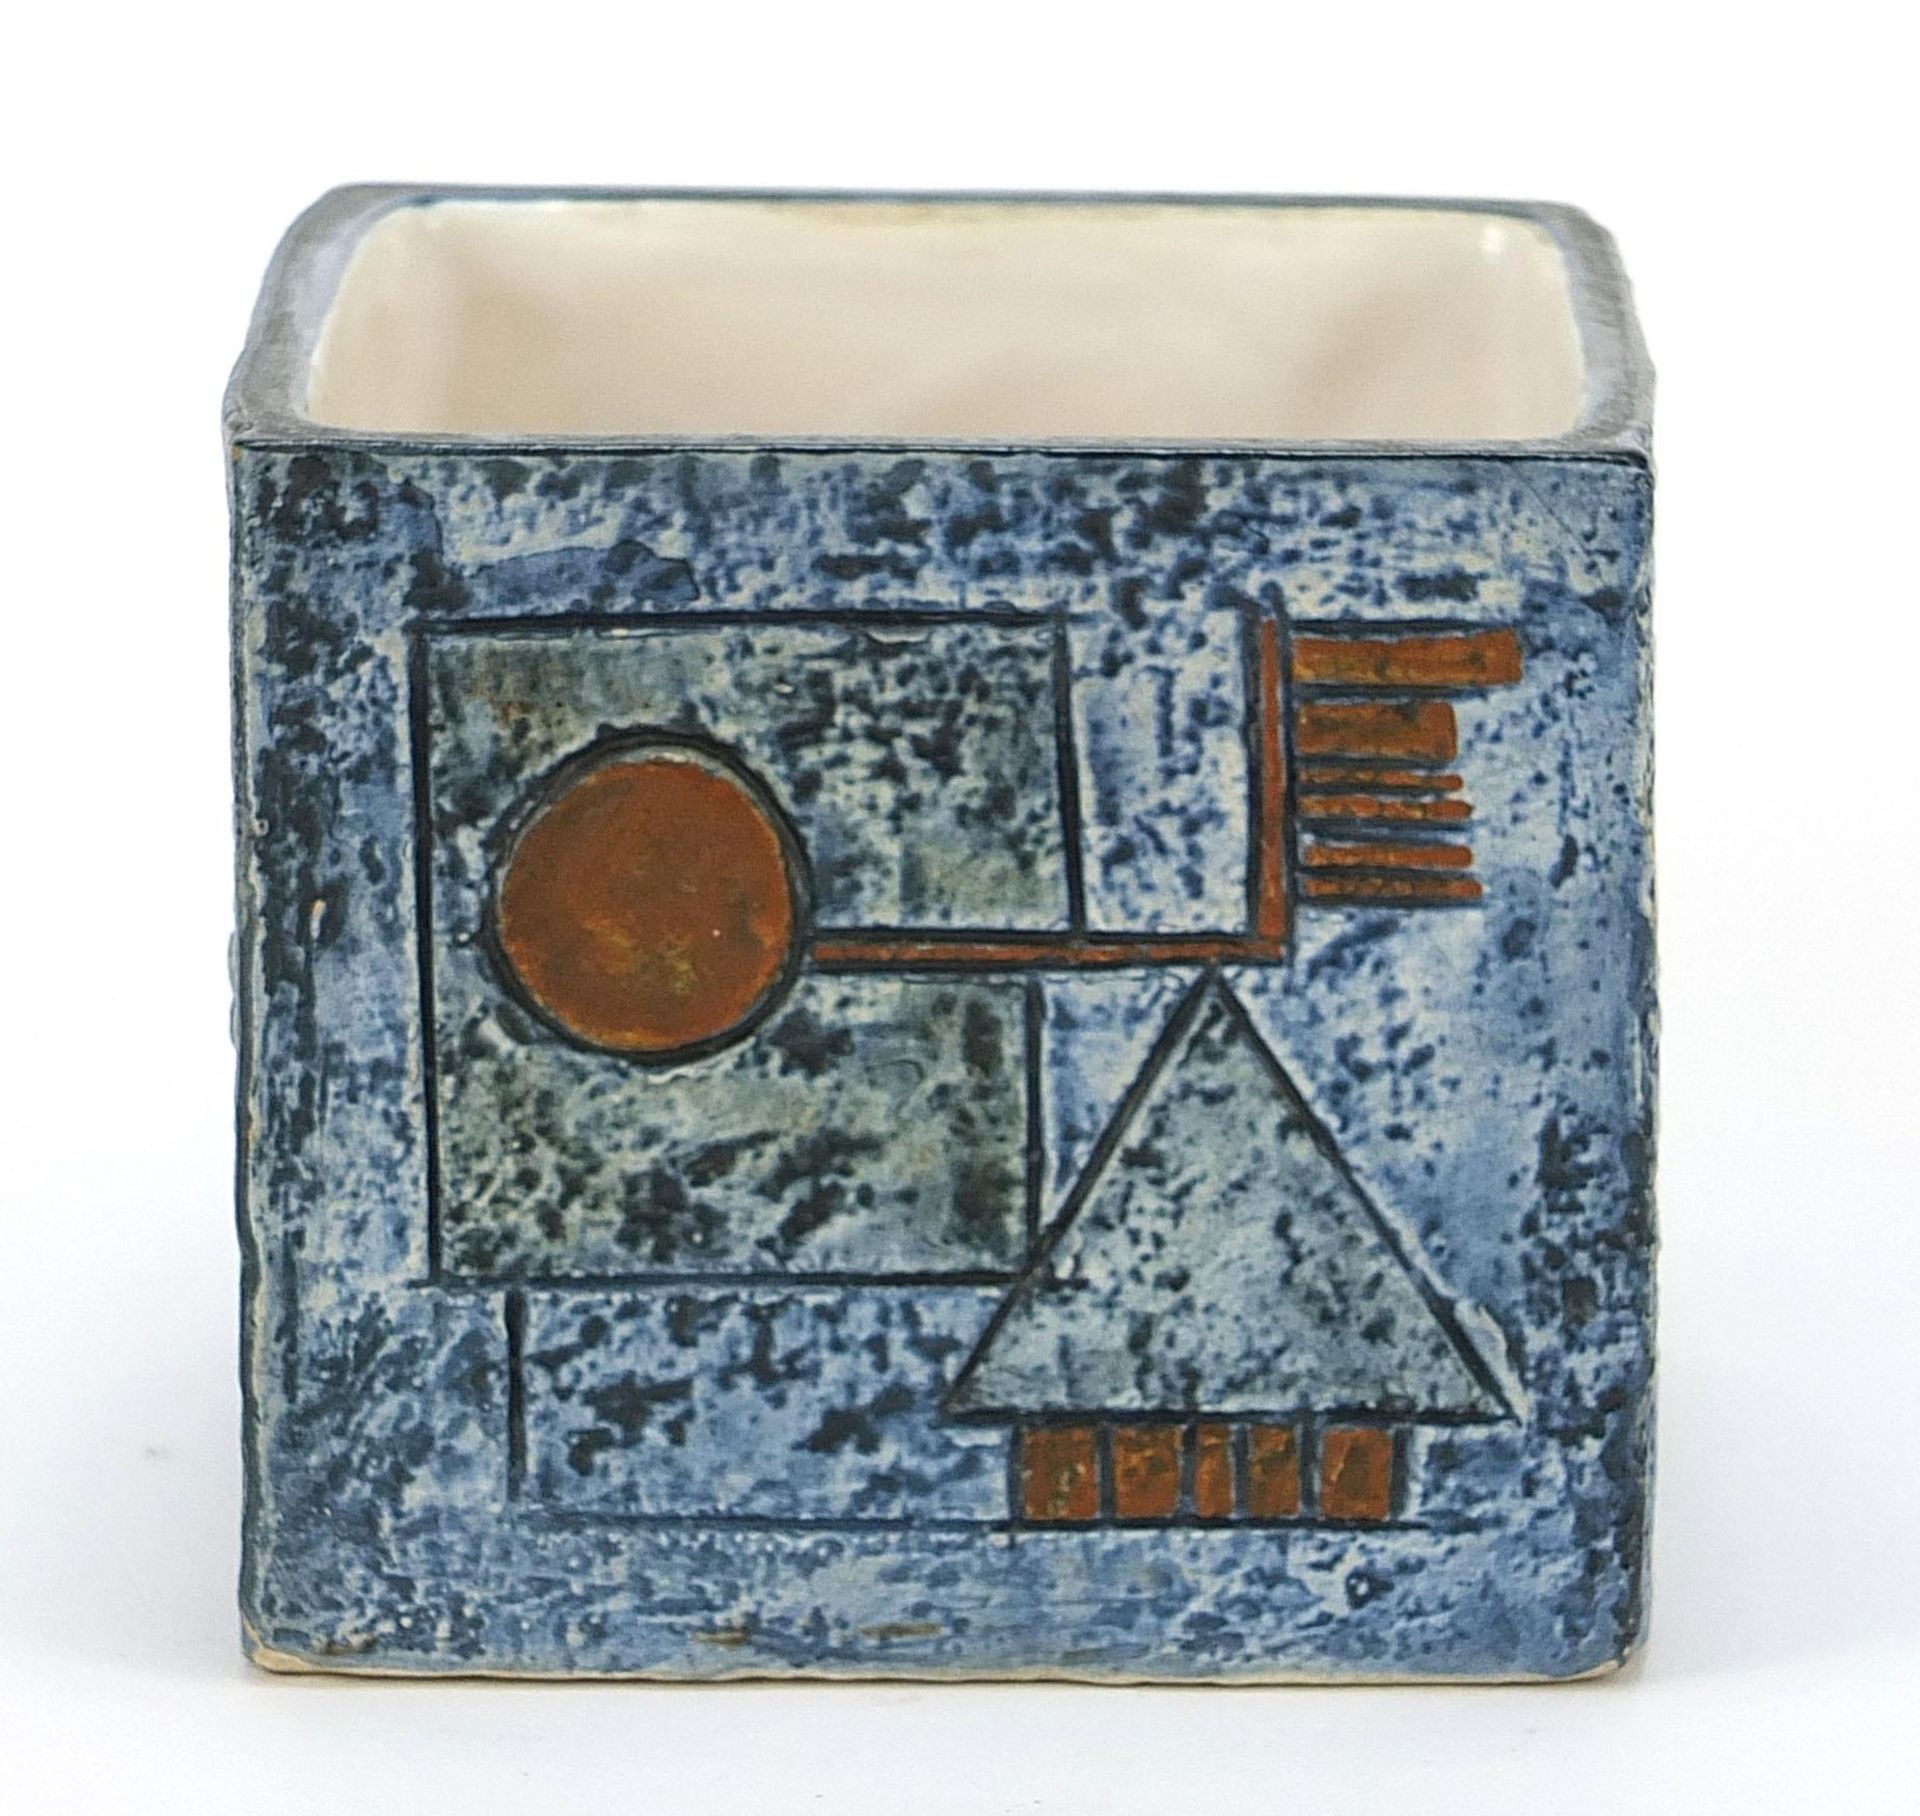 Troika St Ives Pottery marmalade pot hand painted and incised with an abstract design, 8cm high x - Image 2 of 5